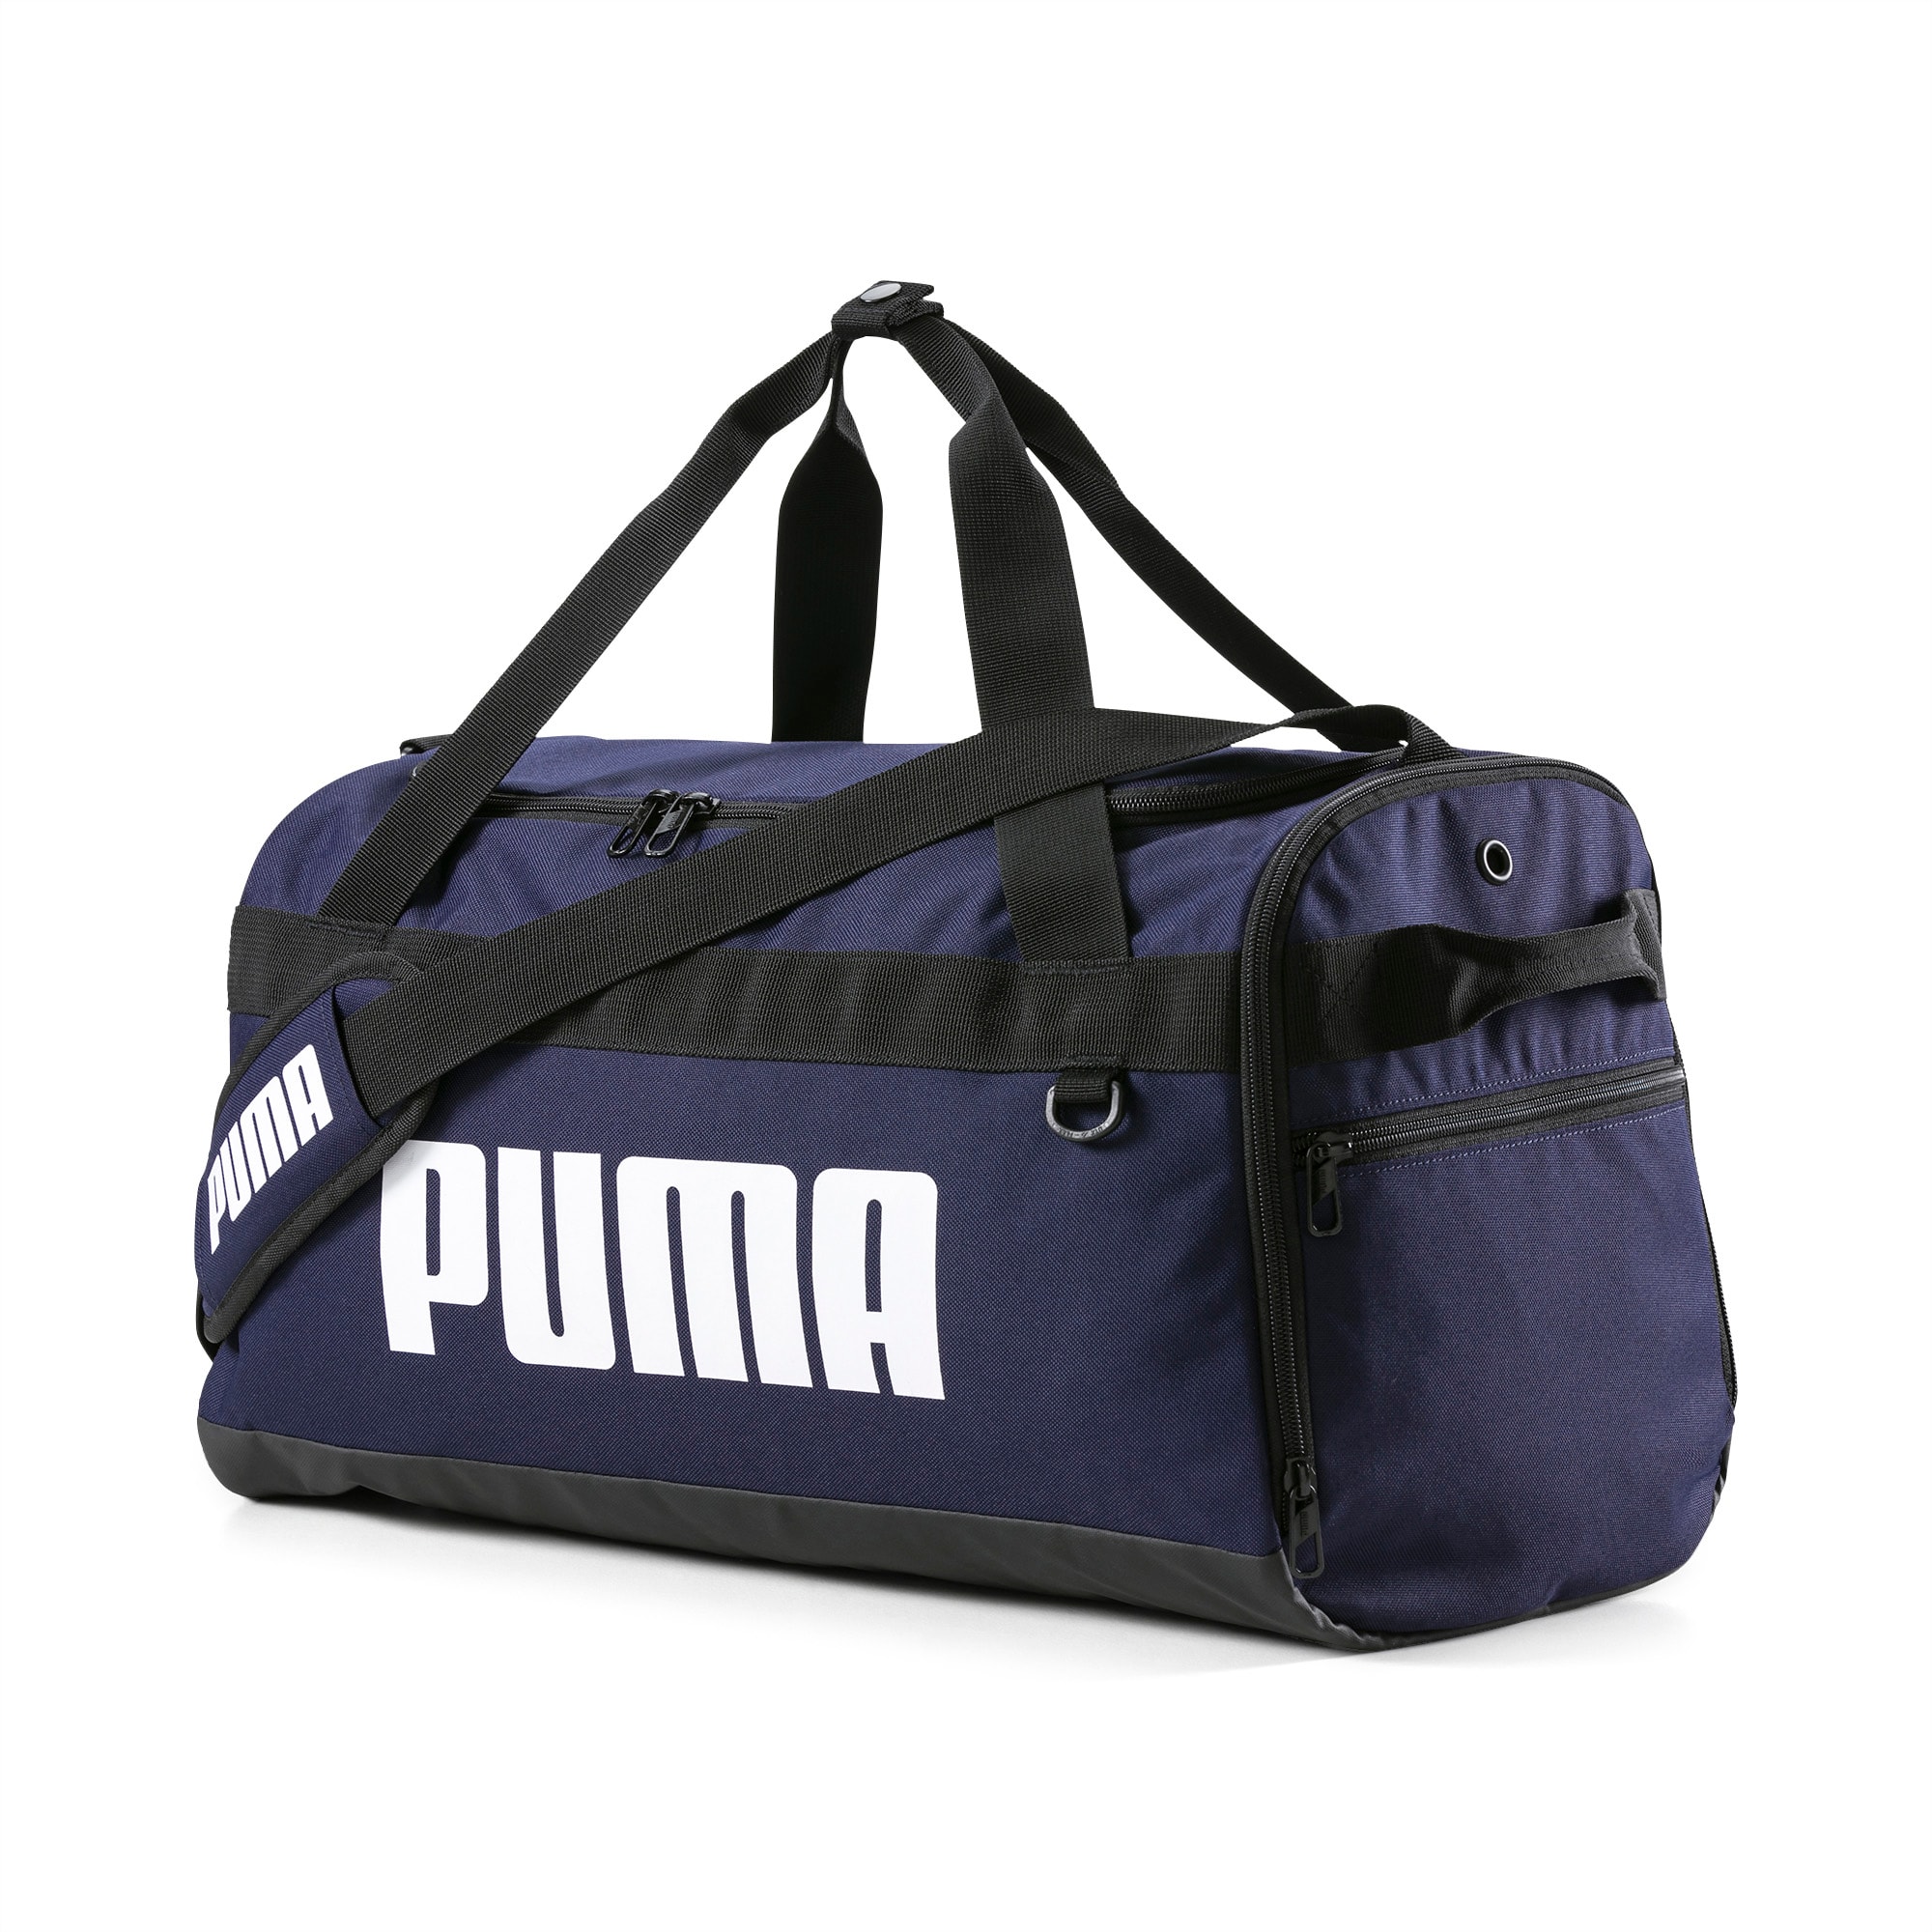 puma sports bags prices